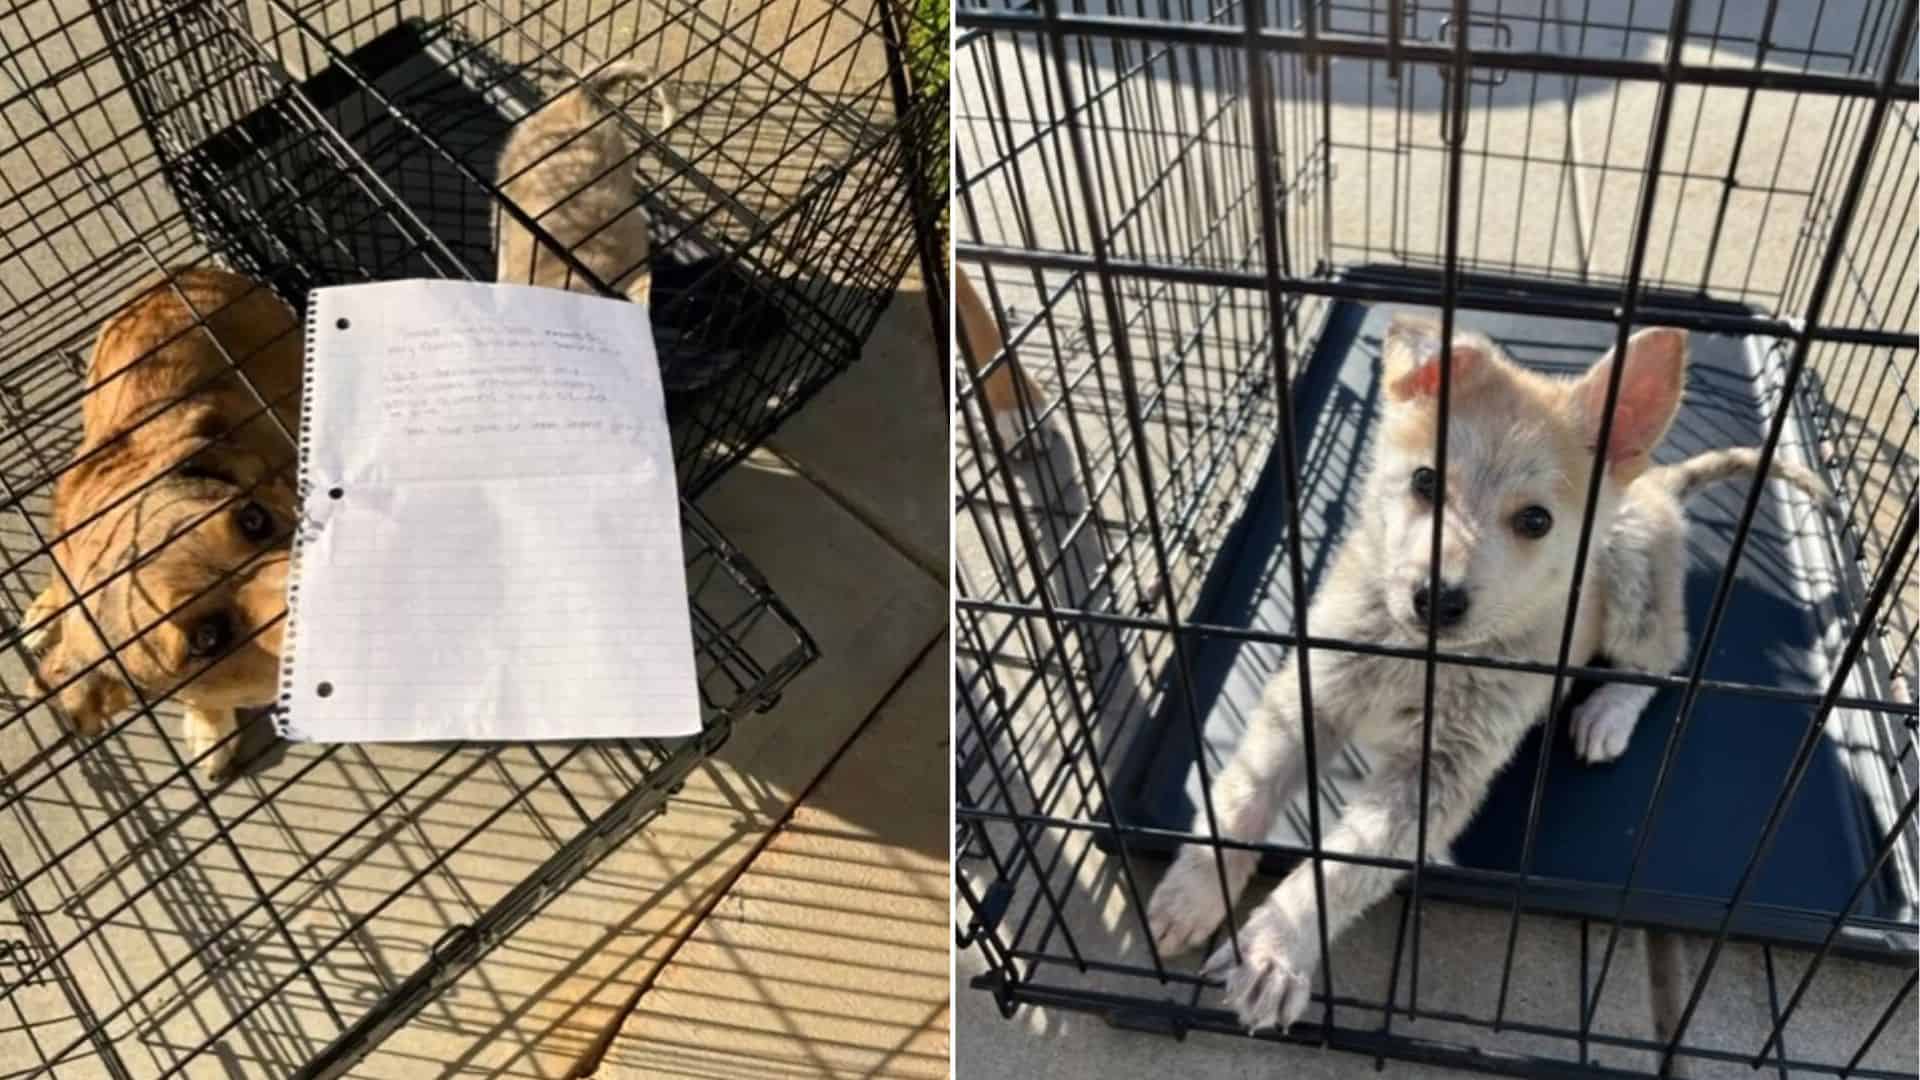 Shelter Workers Stumble Upon Two Tiny Surprises Left In Kennels With A Heartbreaking Note